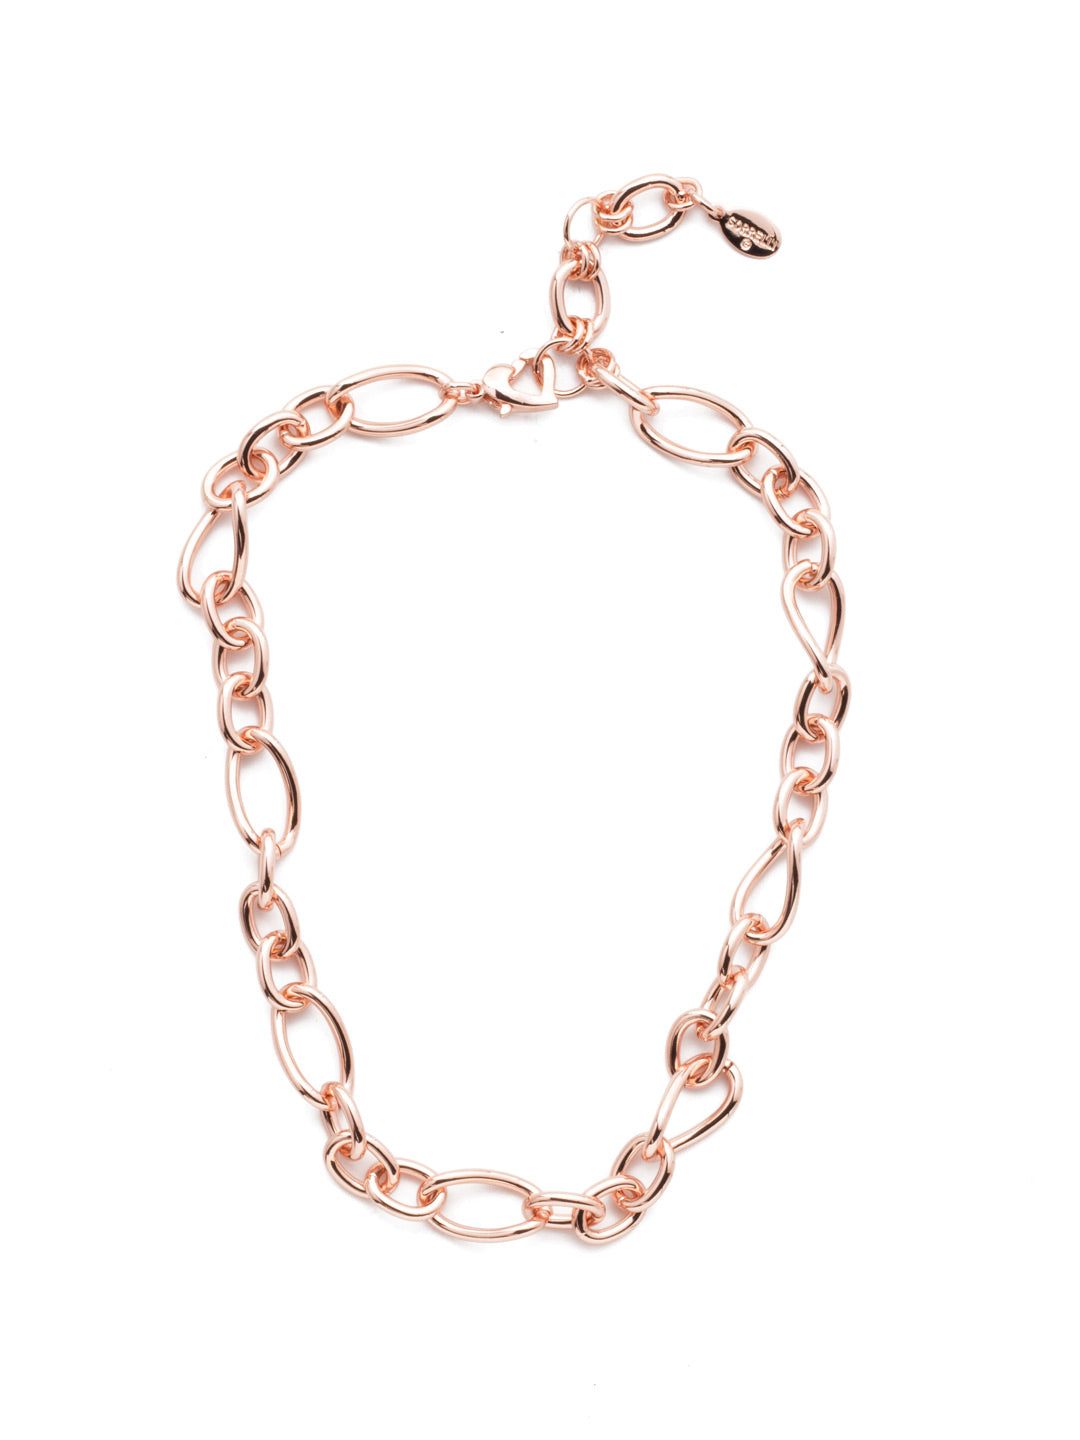 Felicity Tennis Necklace - NES33RGCRY - <p>The Felicity Tennis Necklace is a beautiful linked chain. Wear it by itself or attach a crystal charm for some sparkle. From Sorrelli's Crystal collection in our Rose Gold-tone finish.</p>